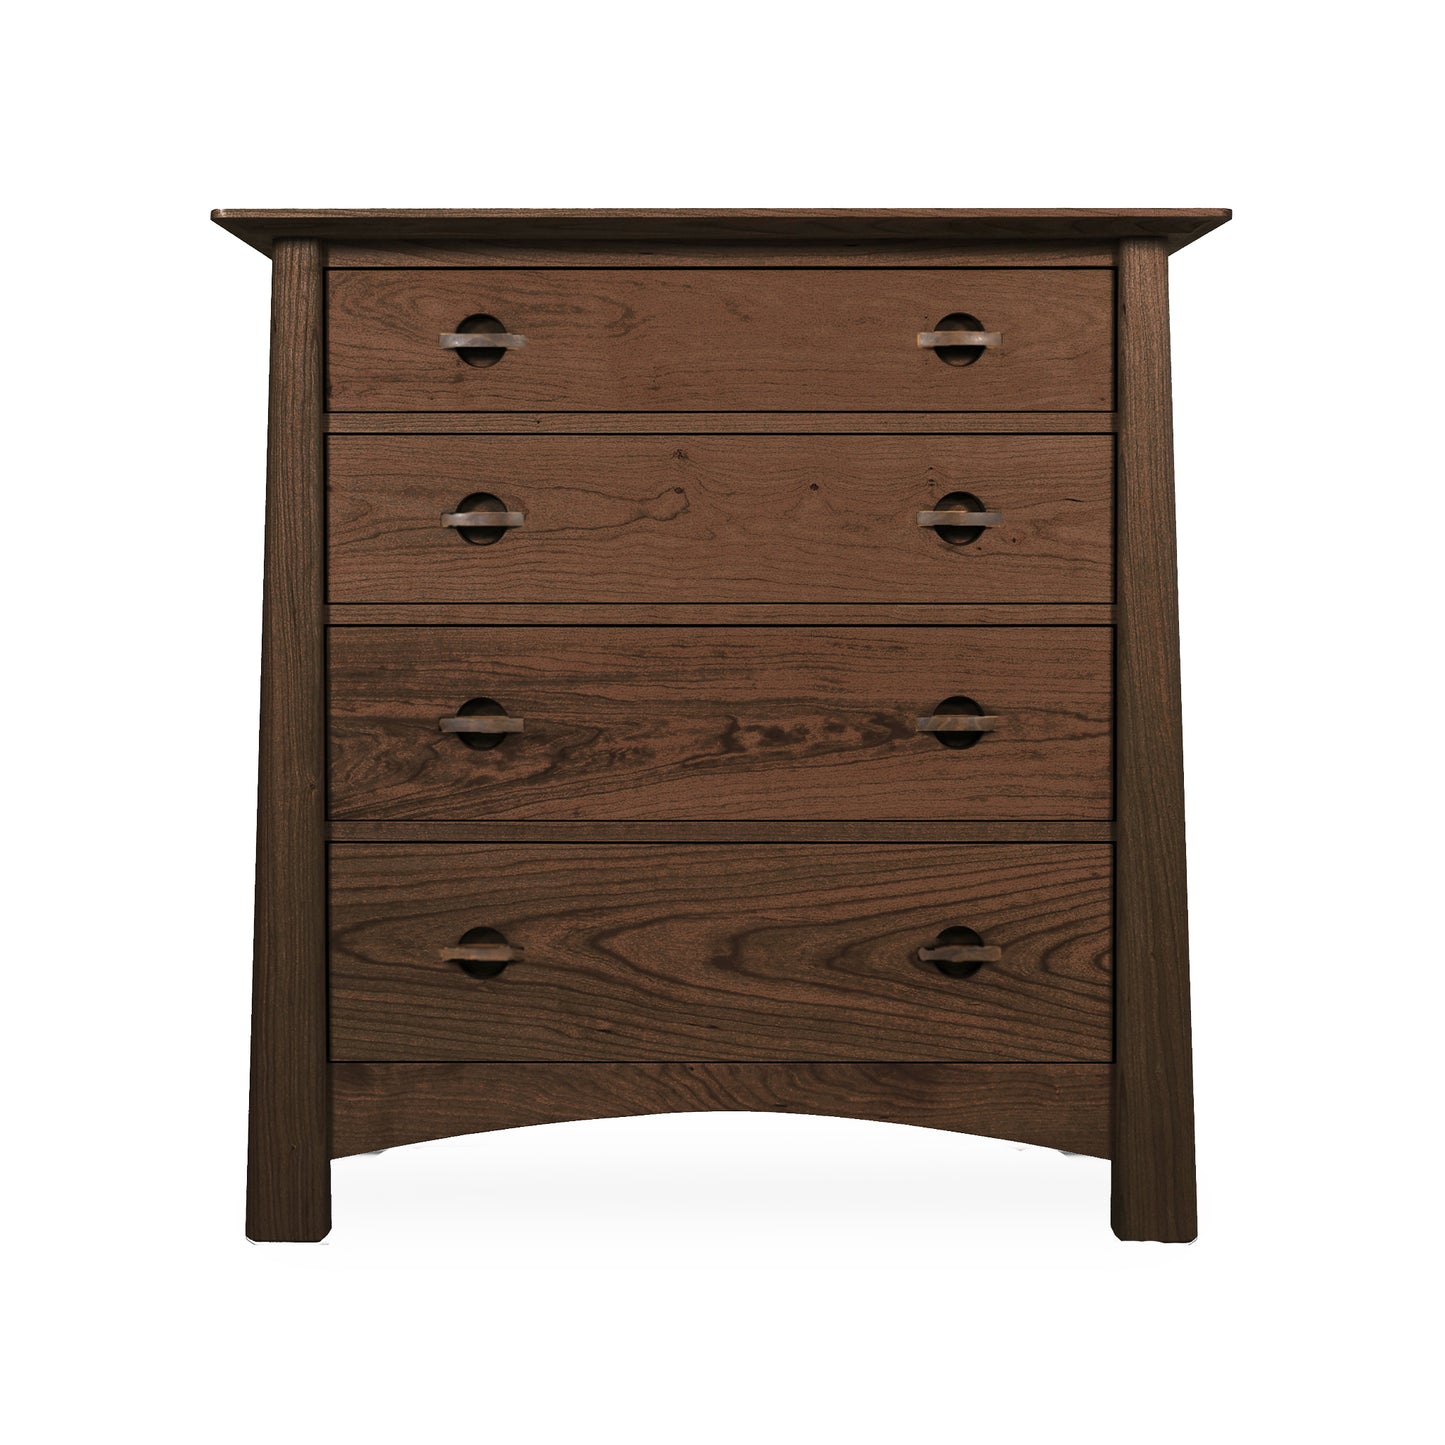 The Maple Corner Woodworks Cherry Moon 4-Drawer Chest combines craftsman and arts & crafts style design with contemporary Asian features.